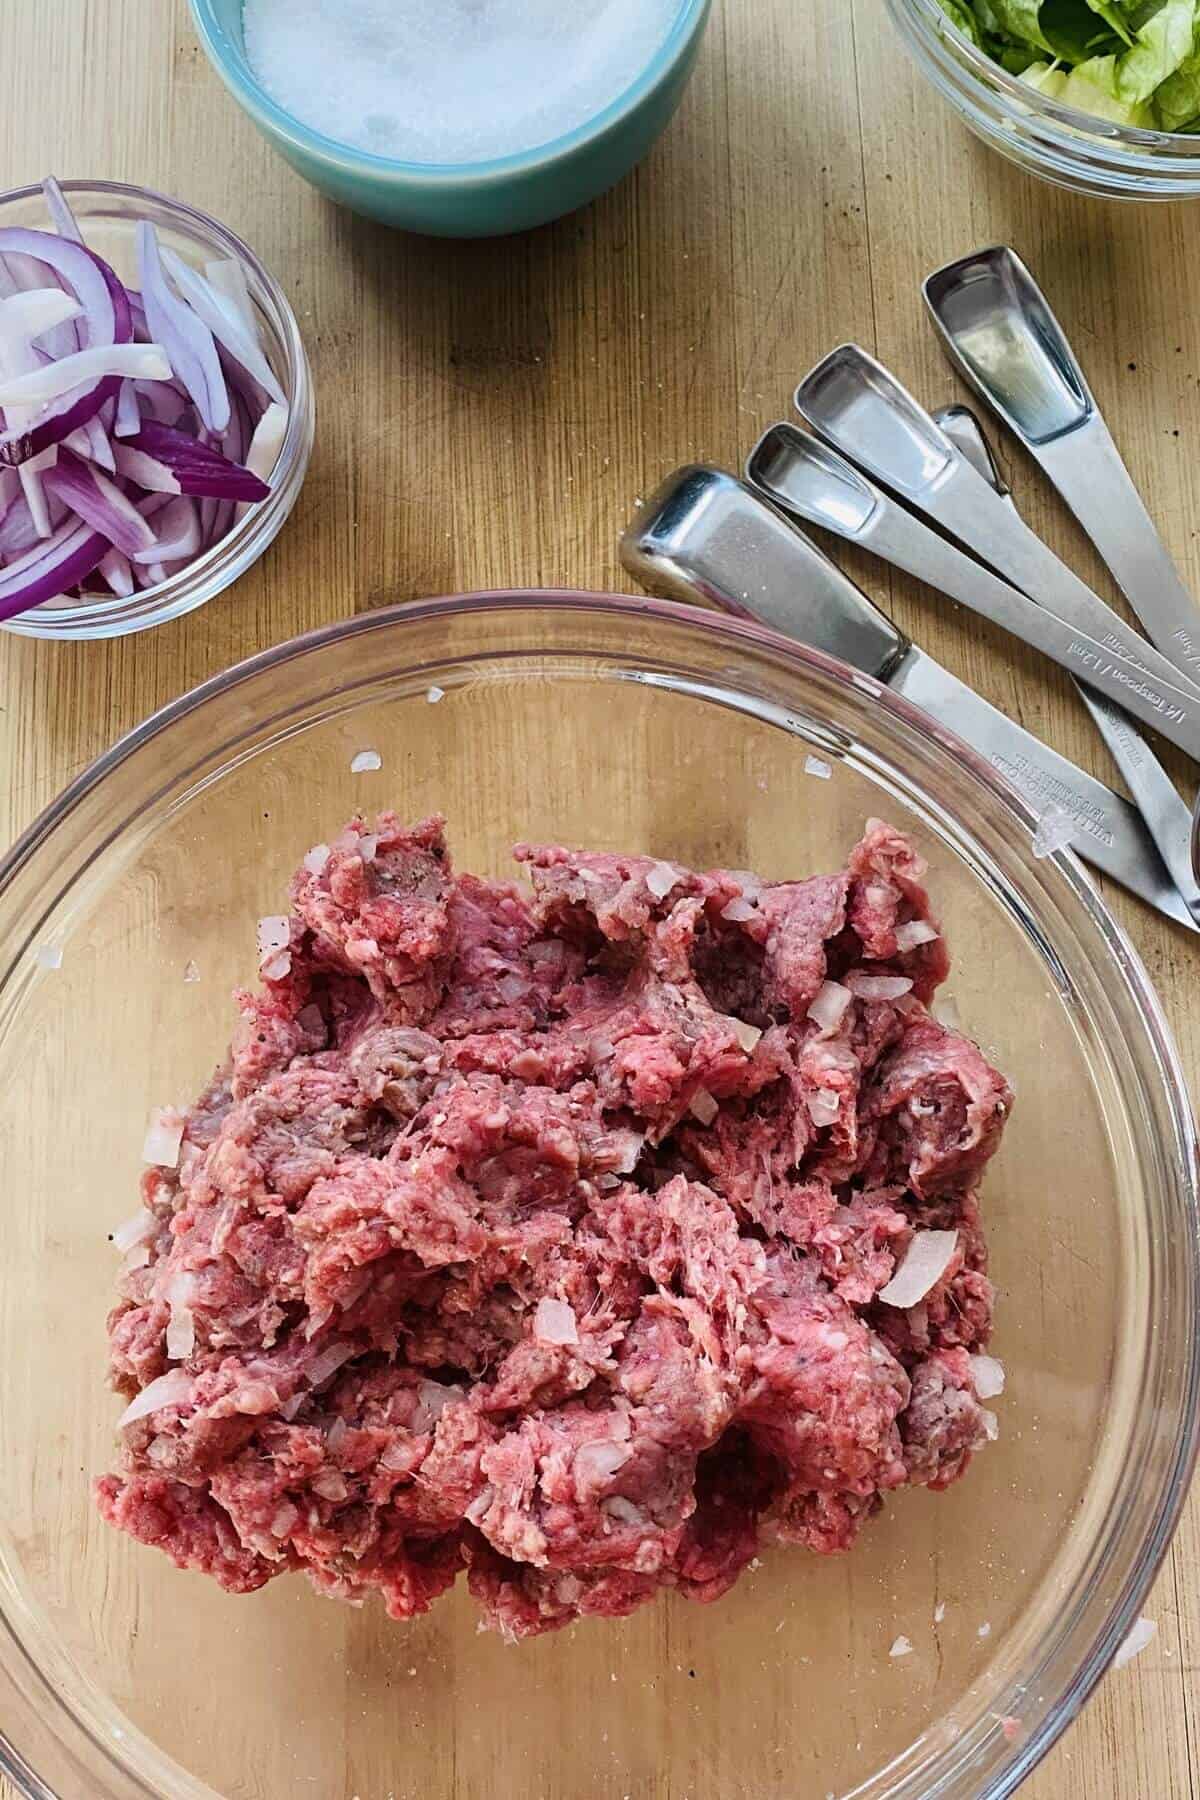 ground meat mixture for burgers.